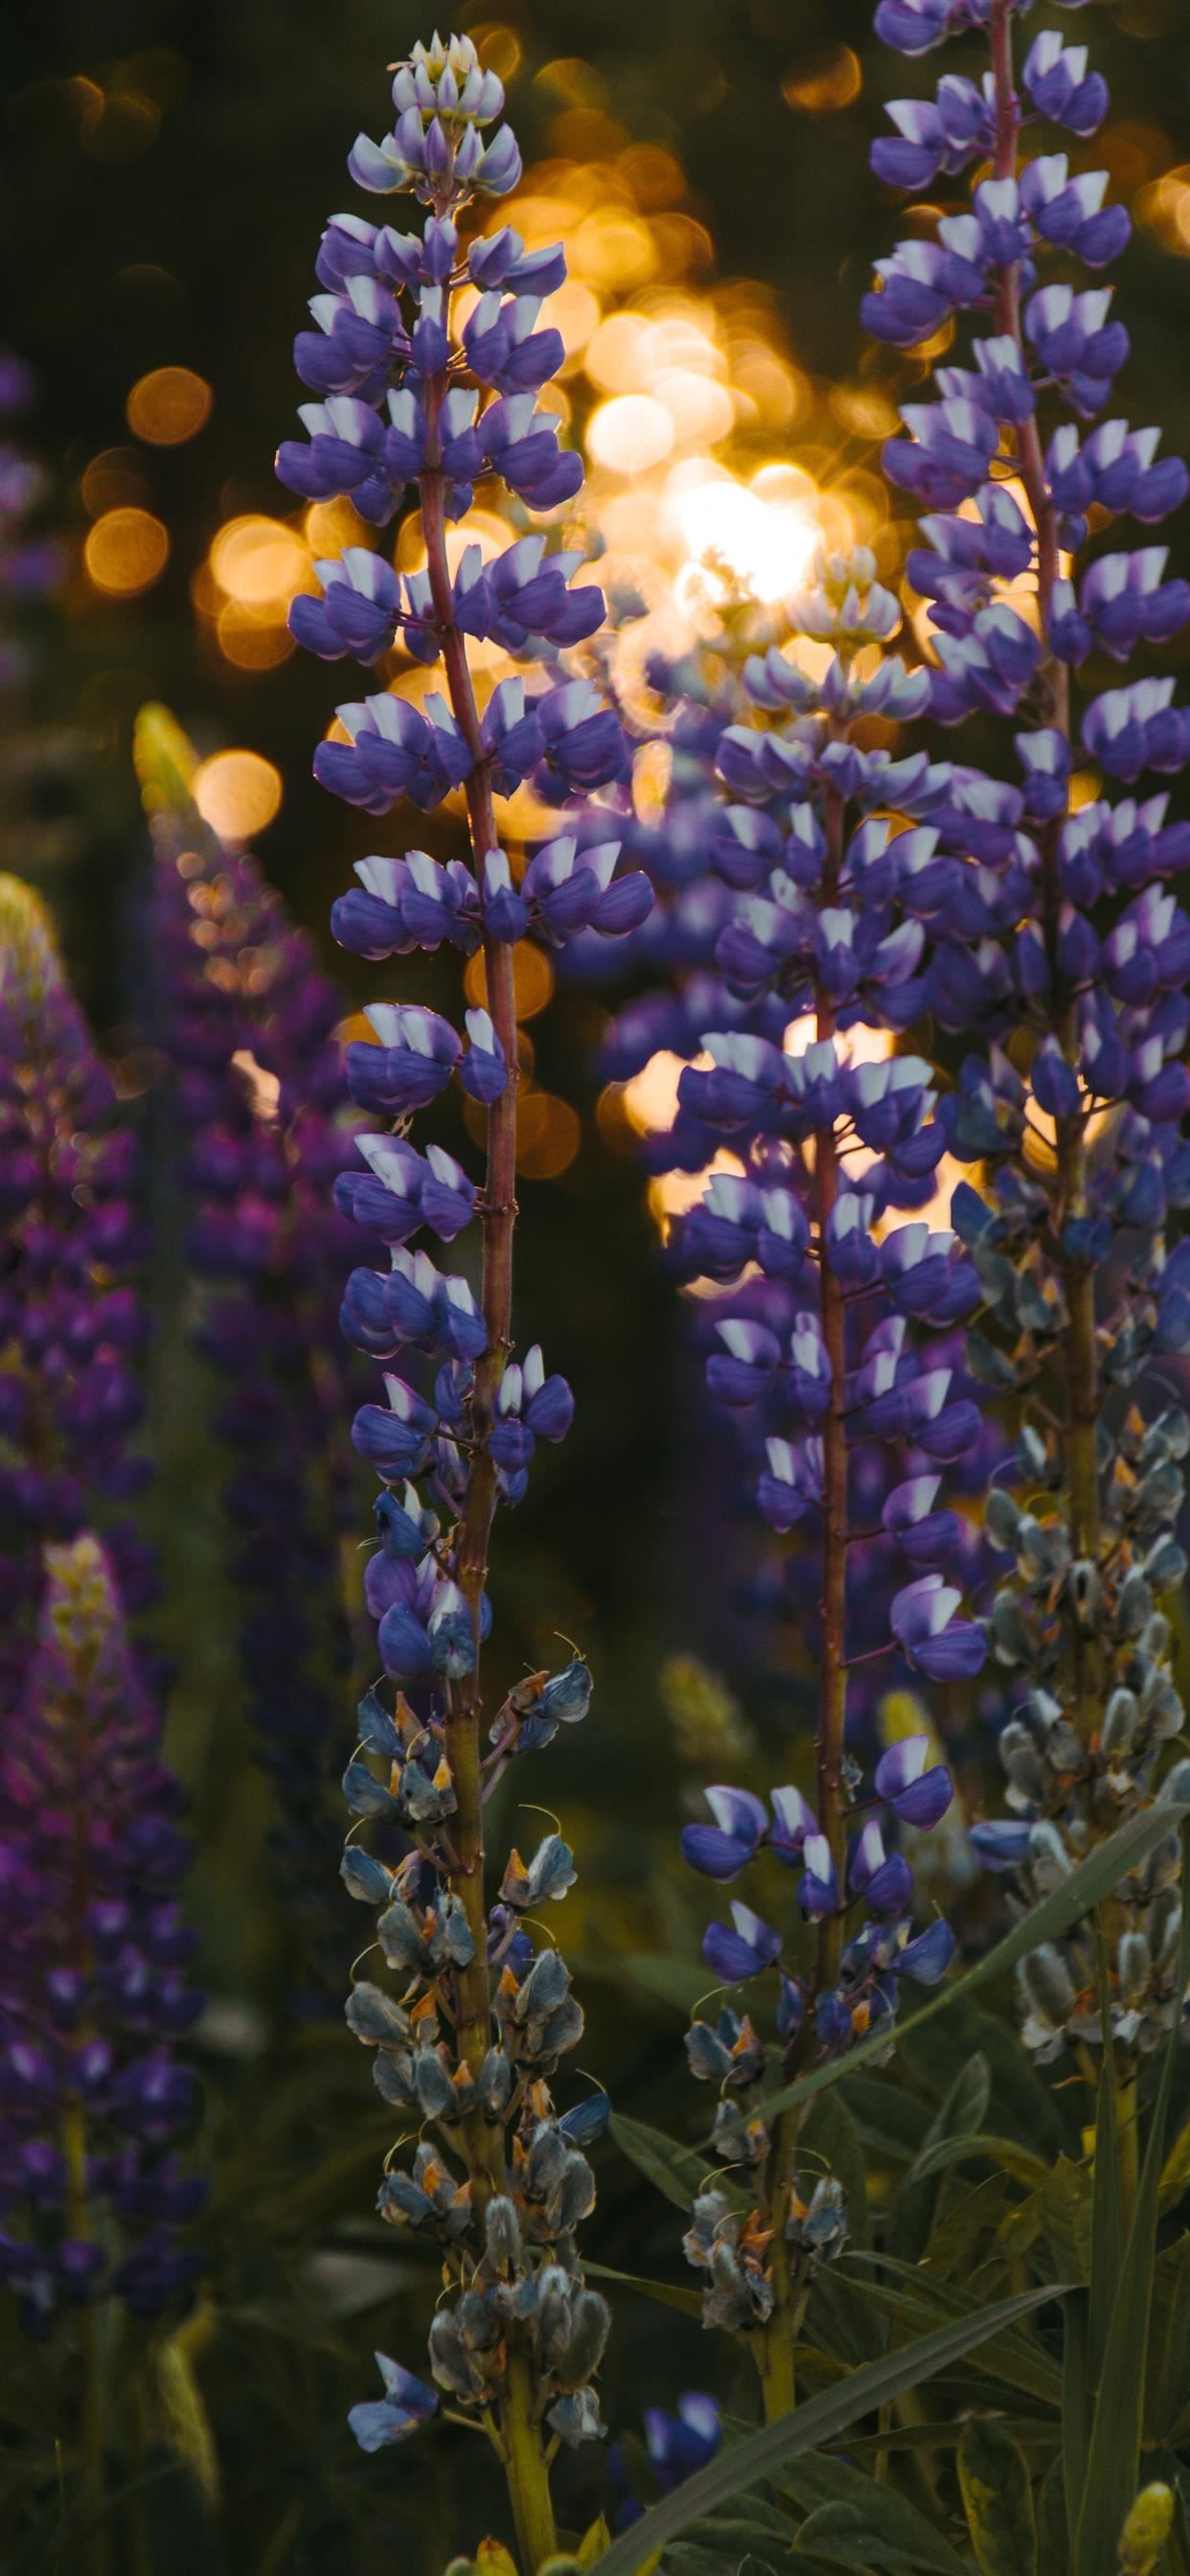 lupine at the sunset bokeh summer iPhone X Wallpaper Free Download